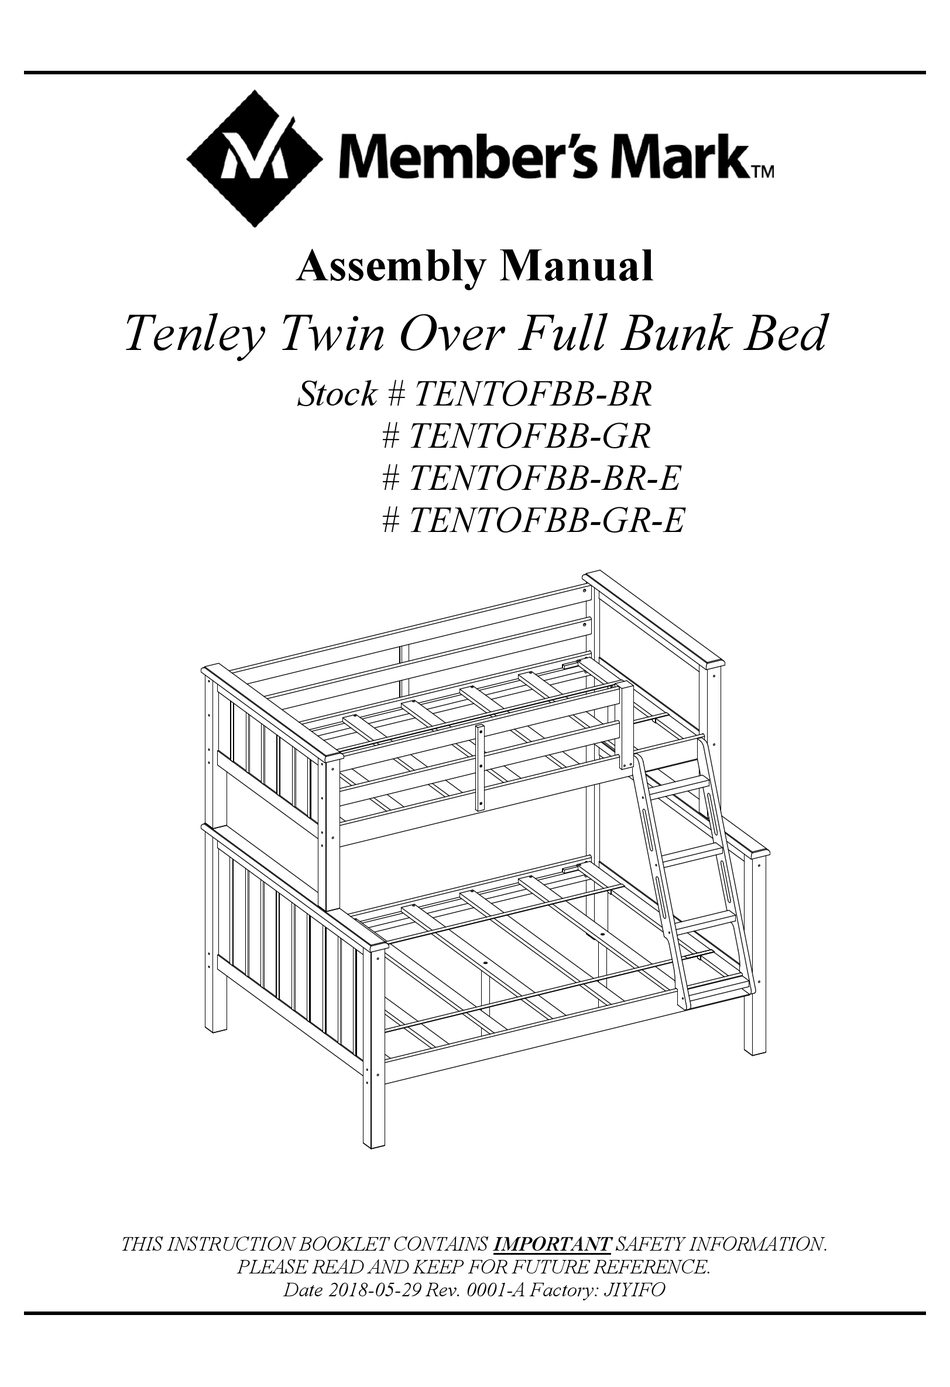 Assembly Manual, Twin Over Full Bunk Bed Assembly Instructions